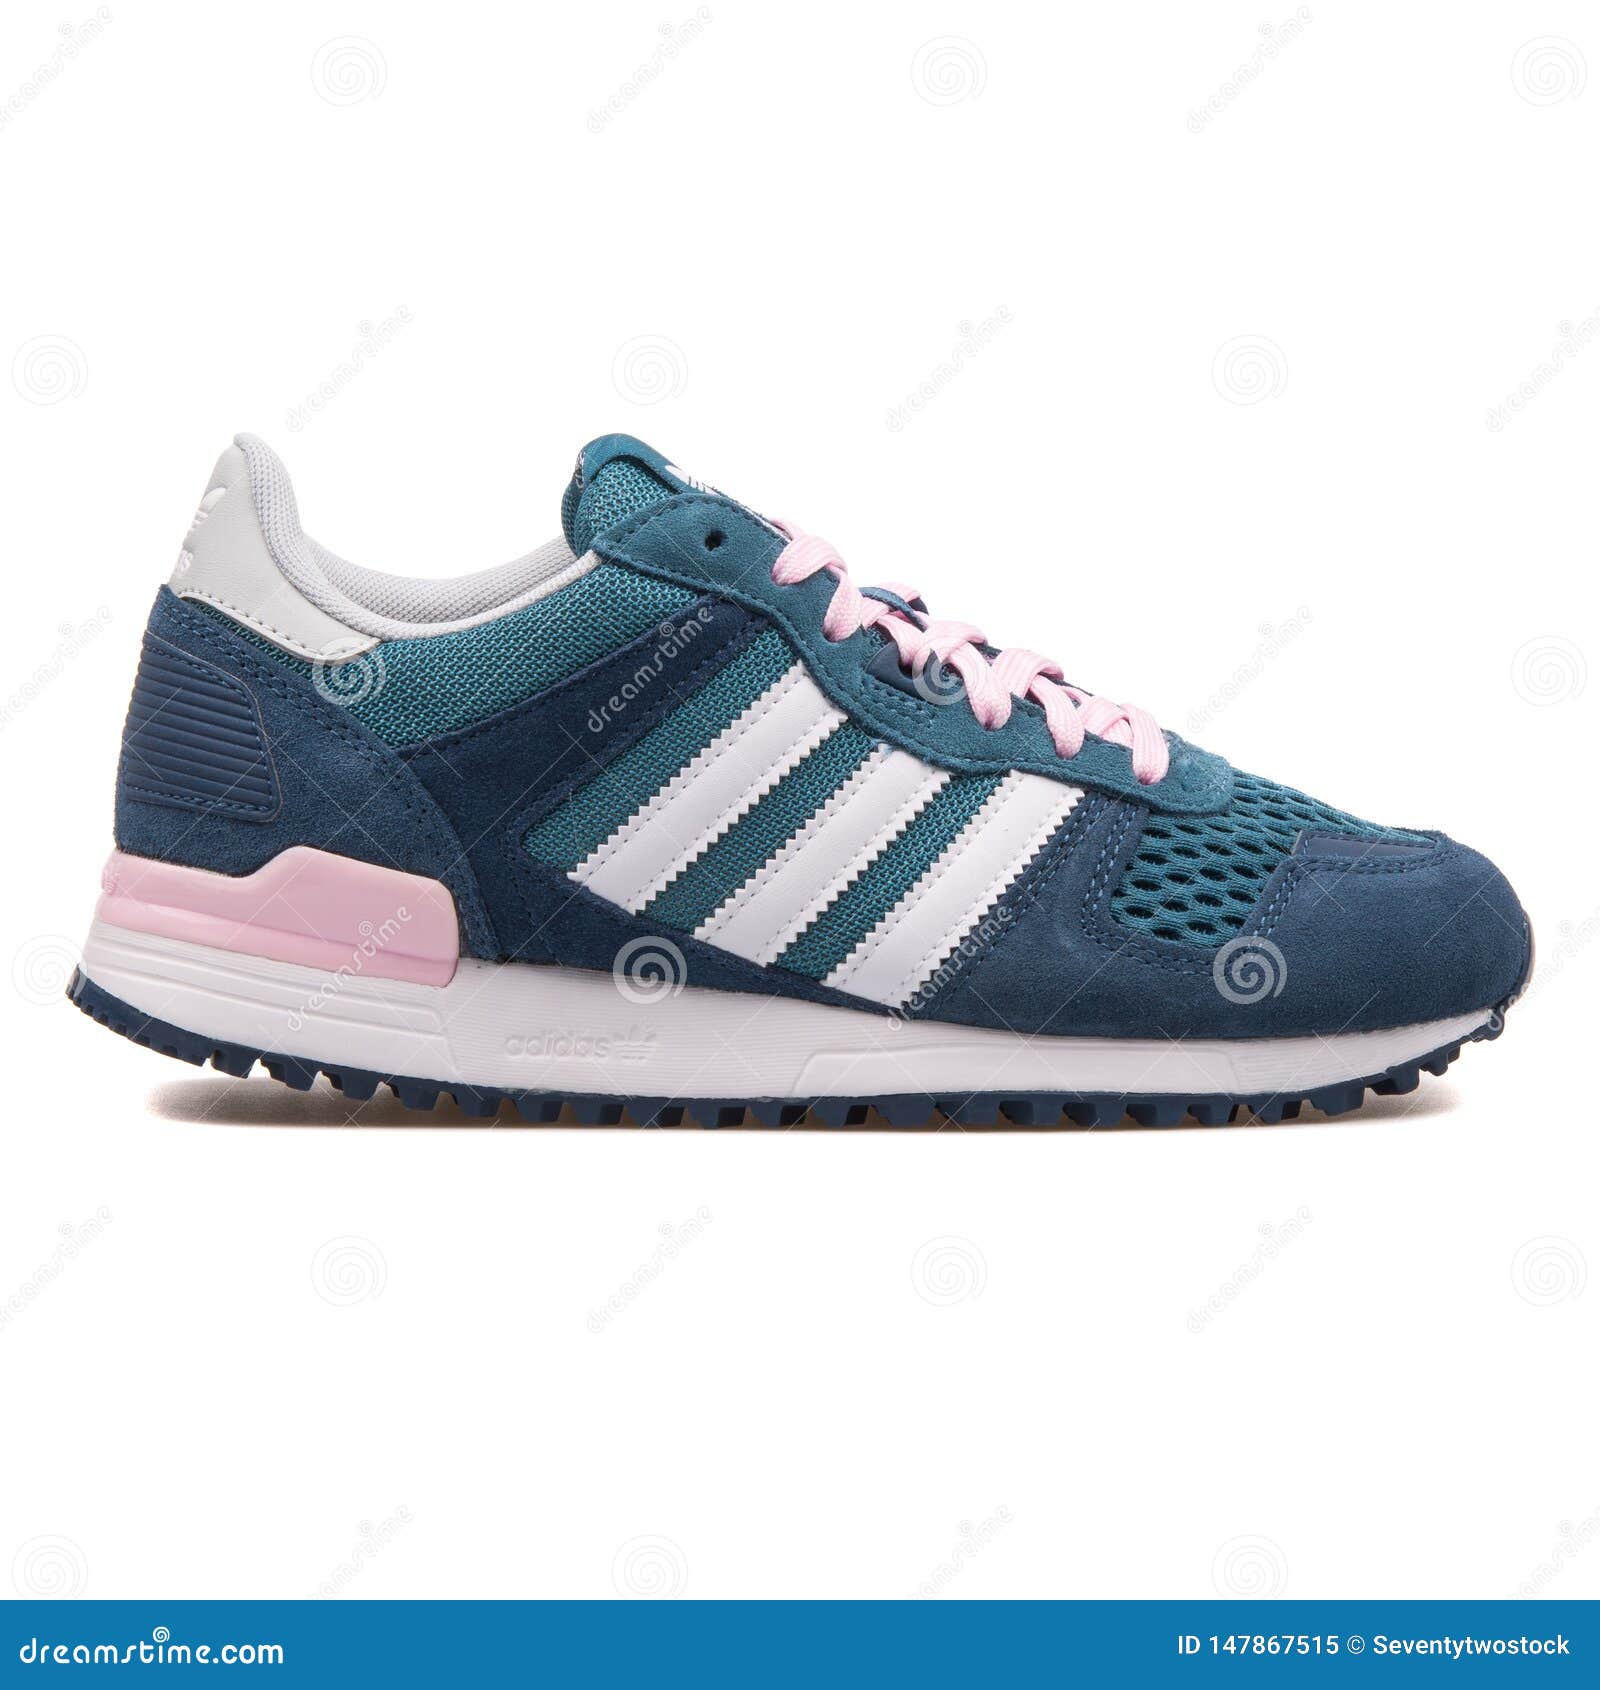 Adidas ZX 700 Blue, Green and Sneaker Editorial Image - Image of accessories, equipment: 147867515